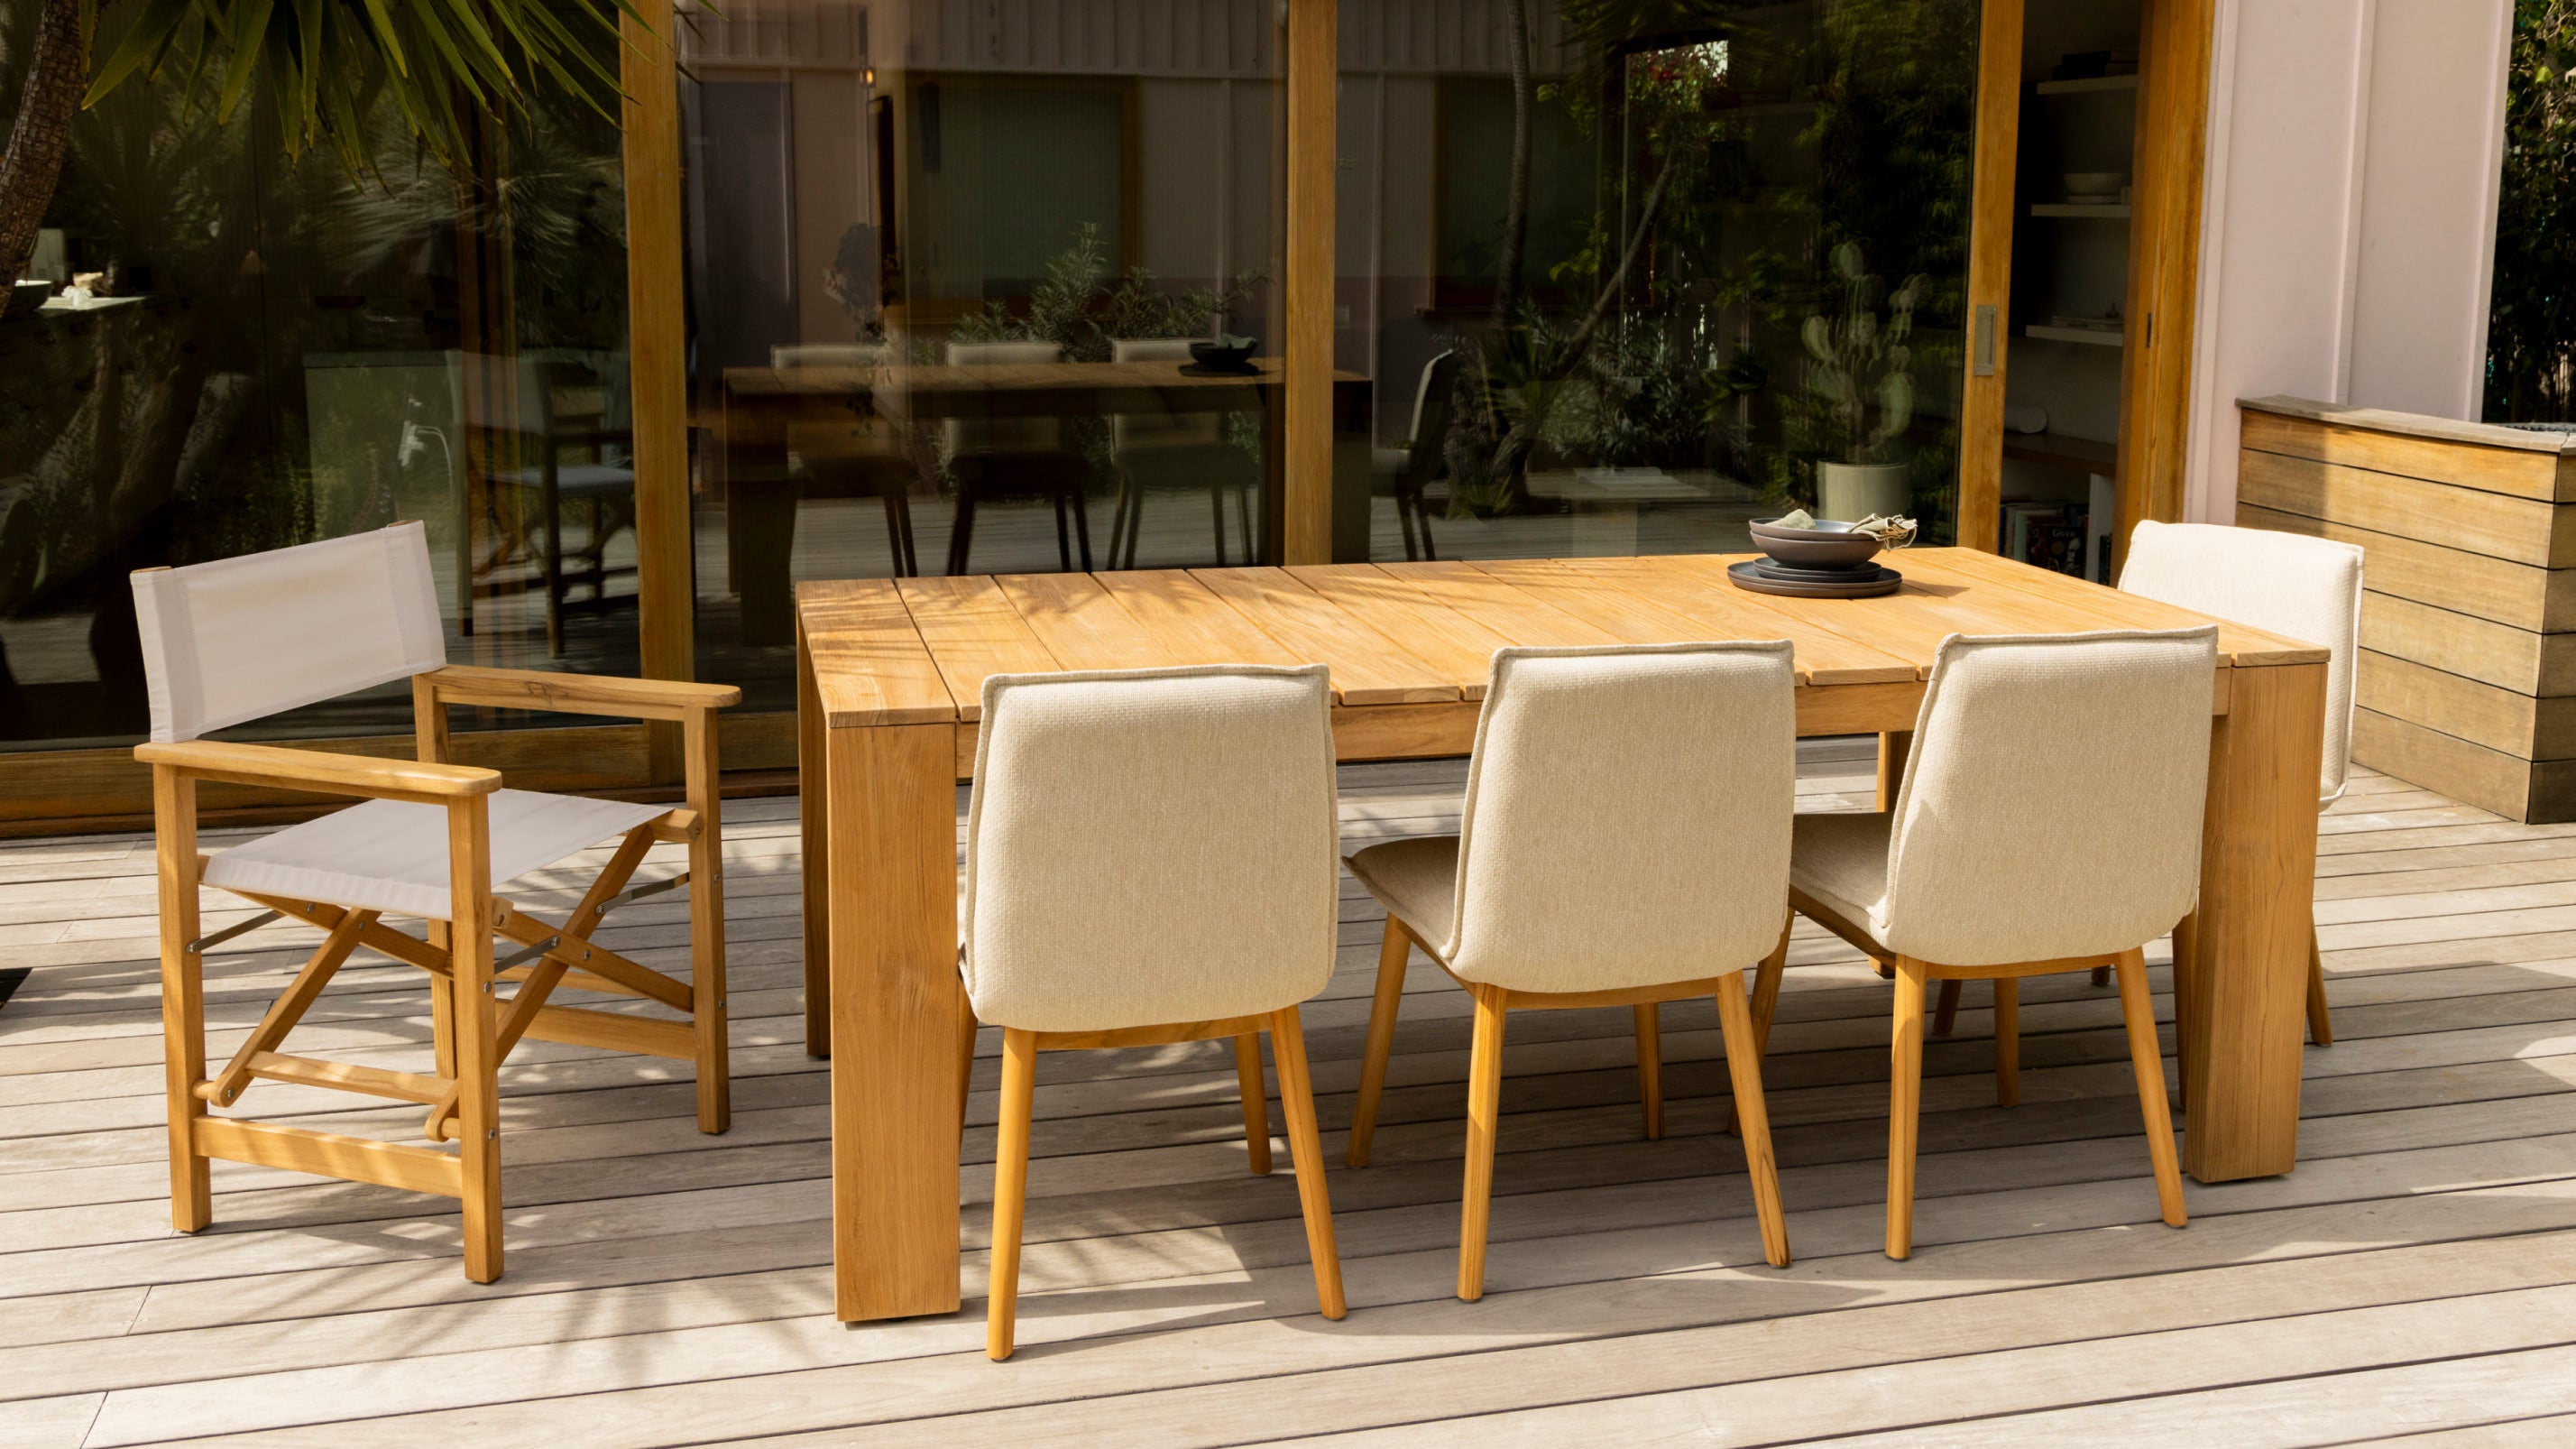 Make Room Outdoor Extendable Dining Table, Seats 6-8 People, Teak - Image 3